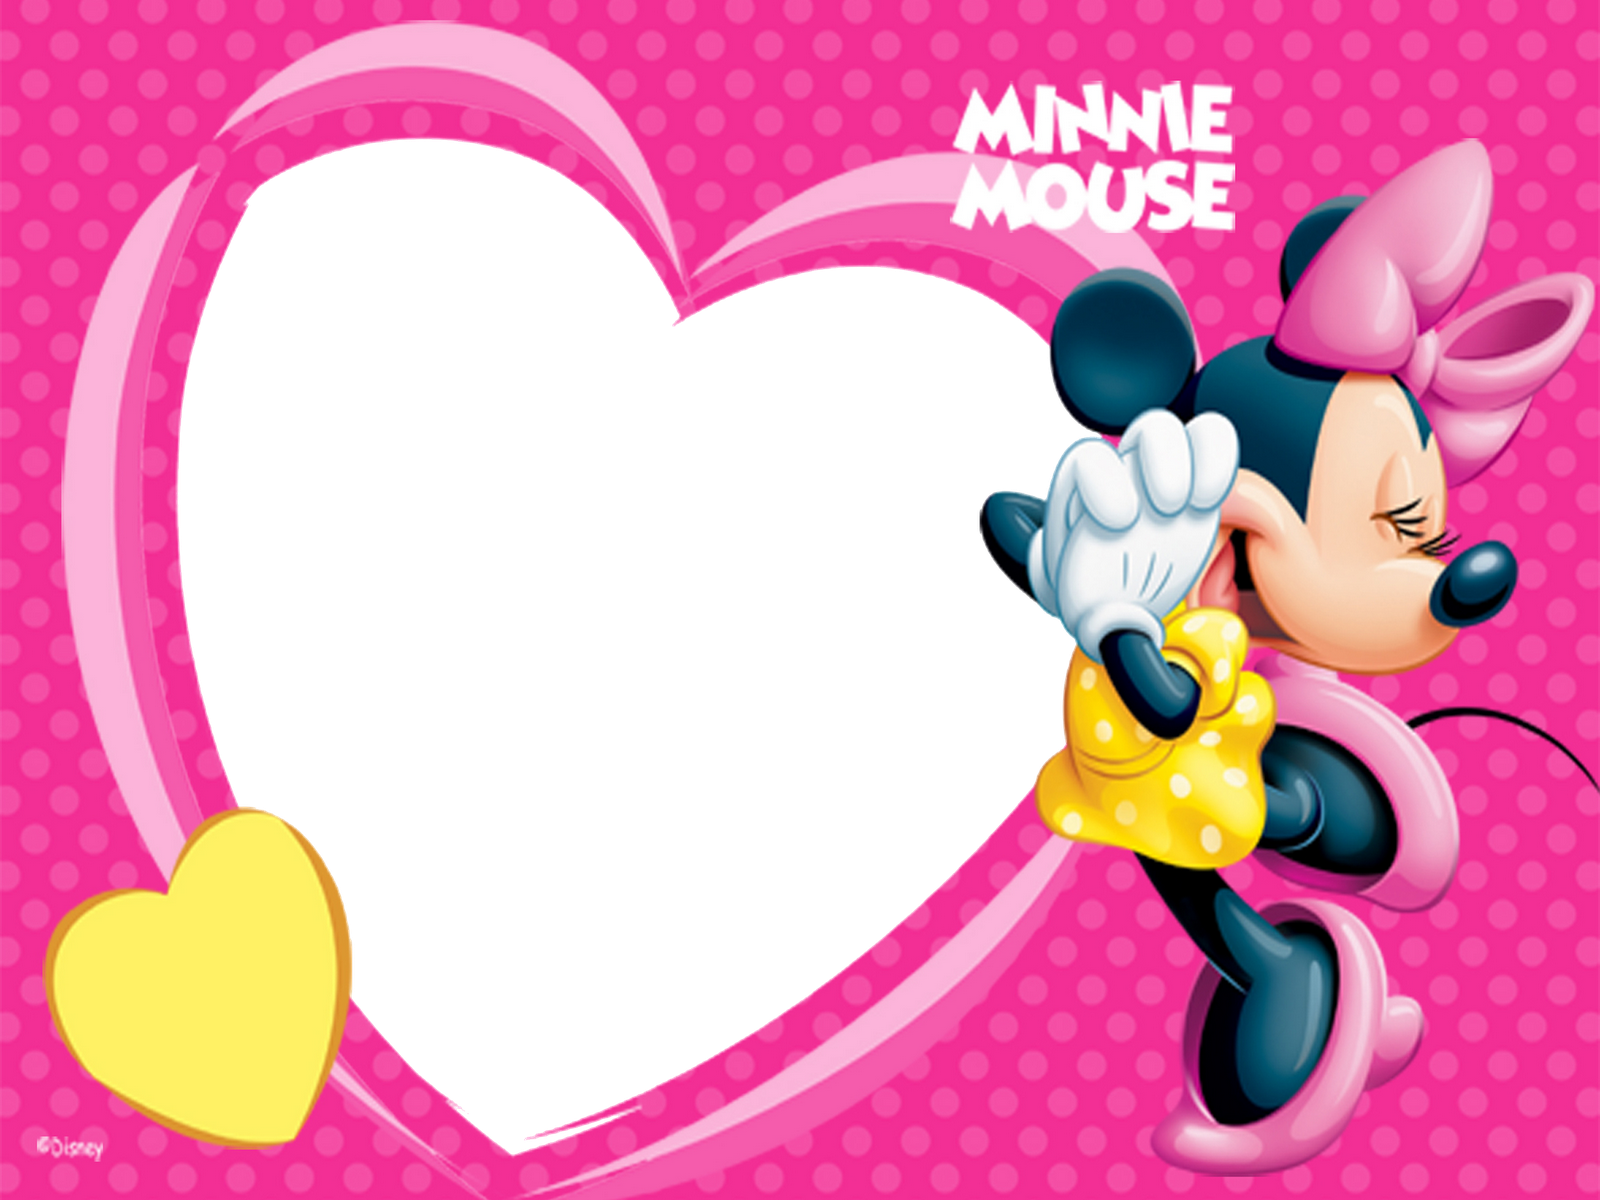 Minnie Mouse Image Wallpaper for FB Cover - Cartoons Wallpapers